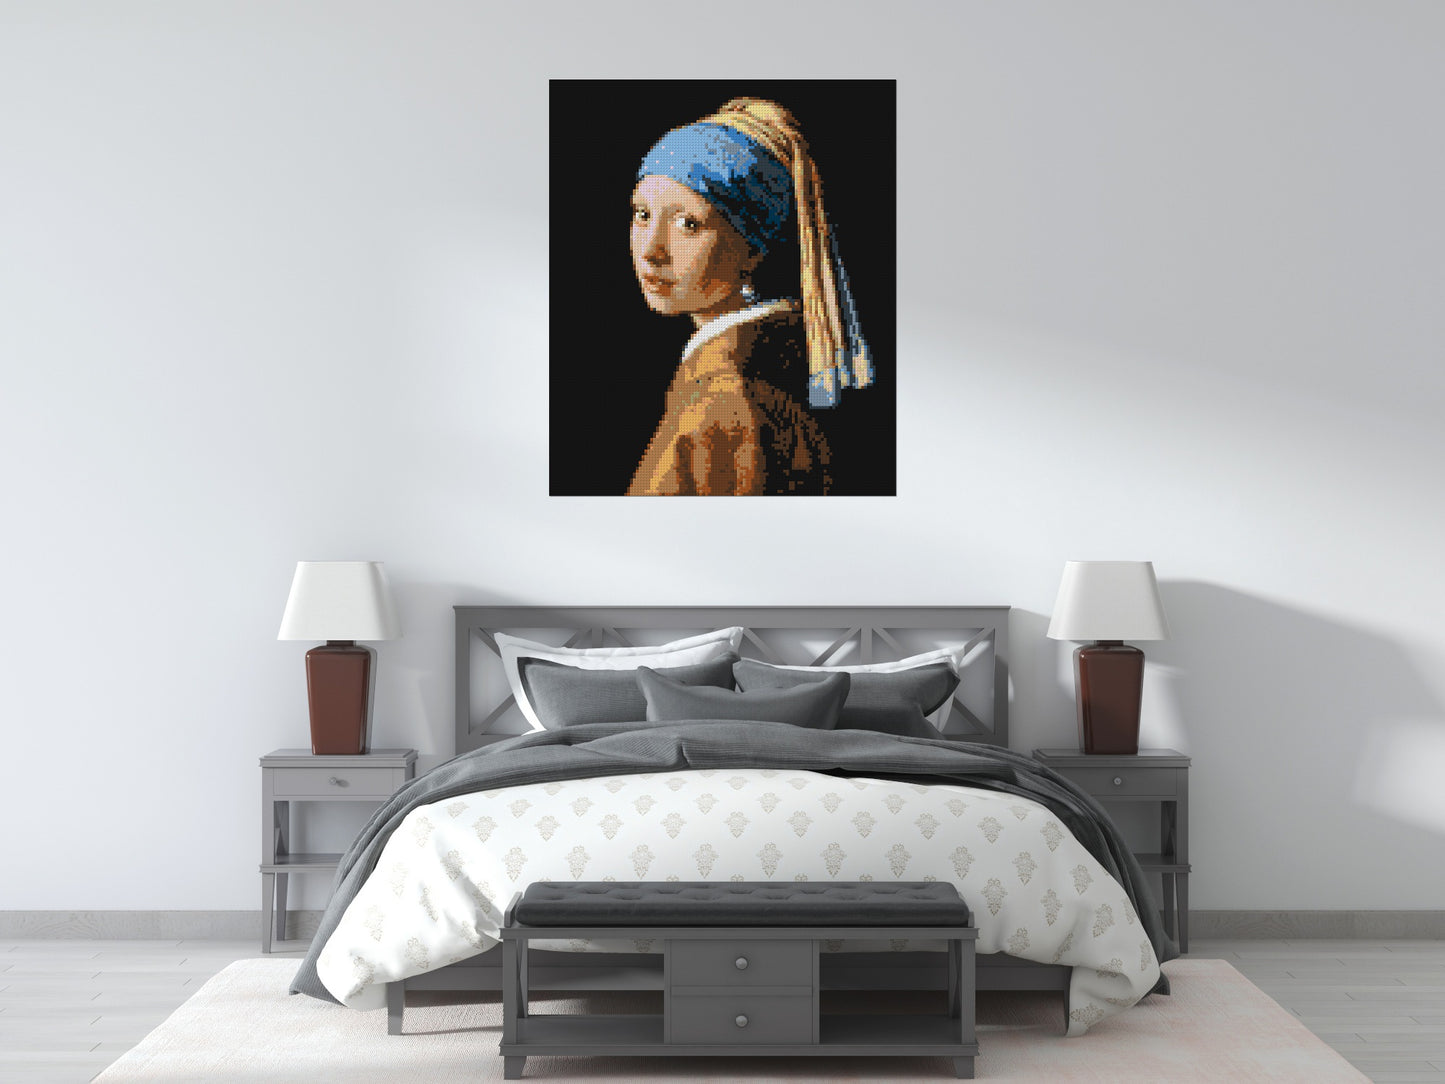 Girl with a Pearl Earring by Johannes Vermeer - Brick Art Mosaic Kit